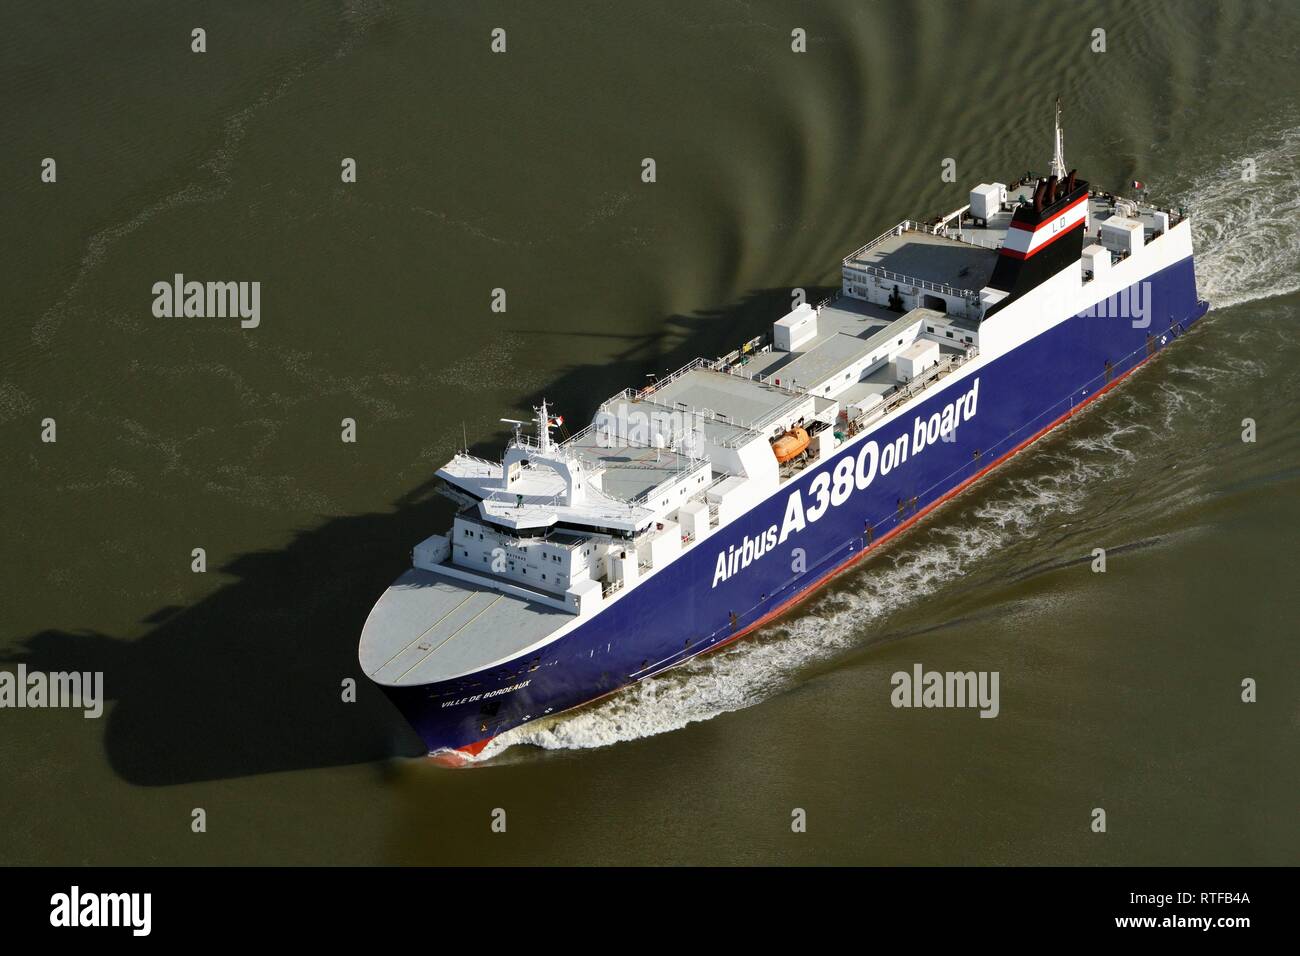 Aerial view, Ville de Bordeux, transport ship for Airbus on the Elbe, Hamburg, Germany Stock Photo